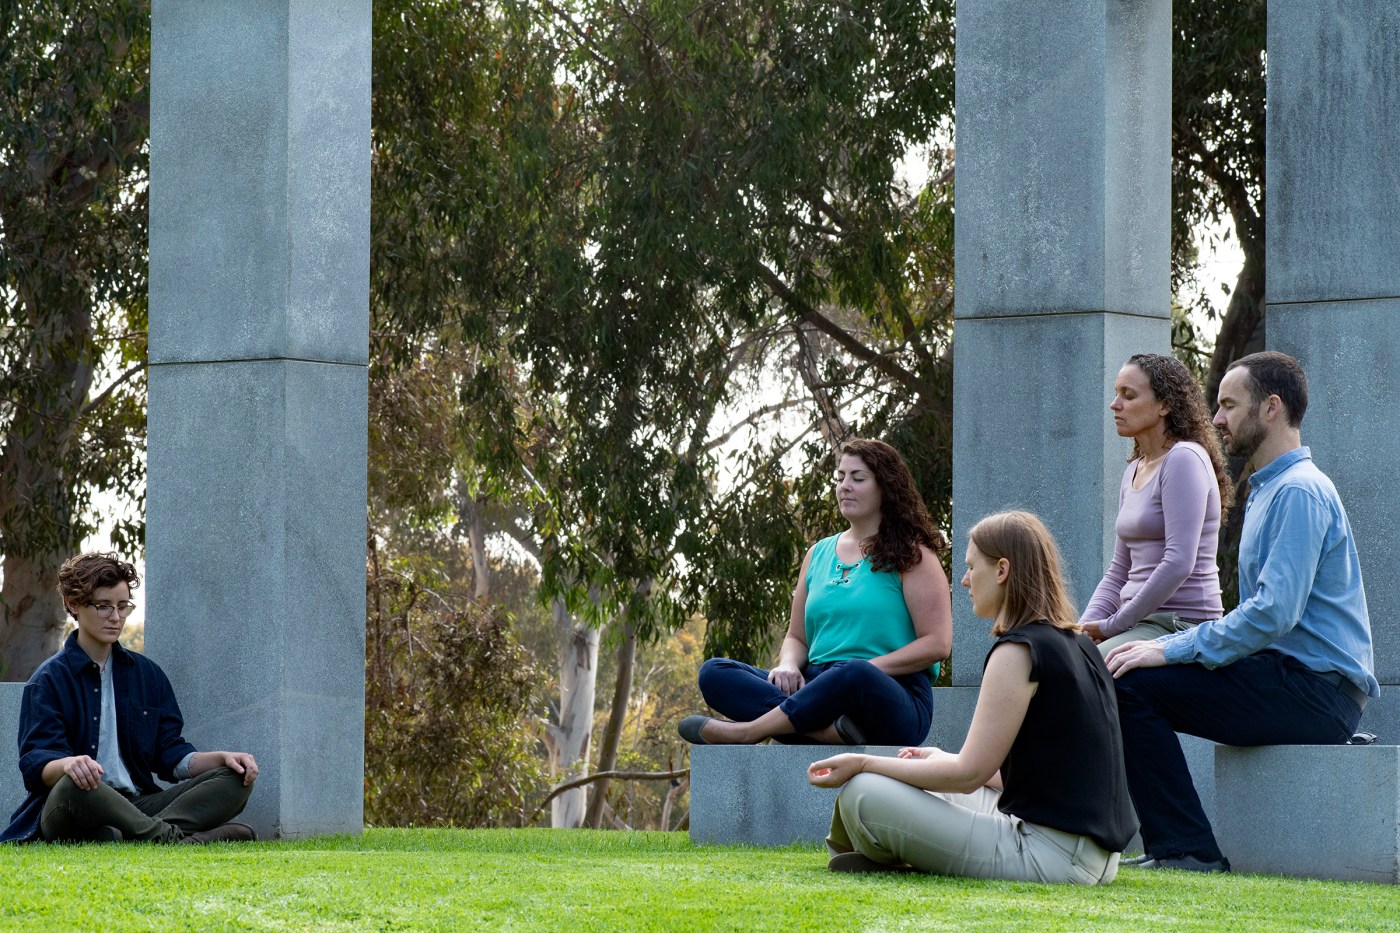 Dr. Ariel Lang (second from right) practices meditation with associates from her lab. She’s focusing on complementary and alternative techniques, such as yoga and meditation, as a therapy for patients with PTSD.